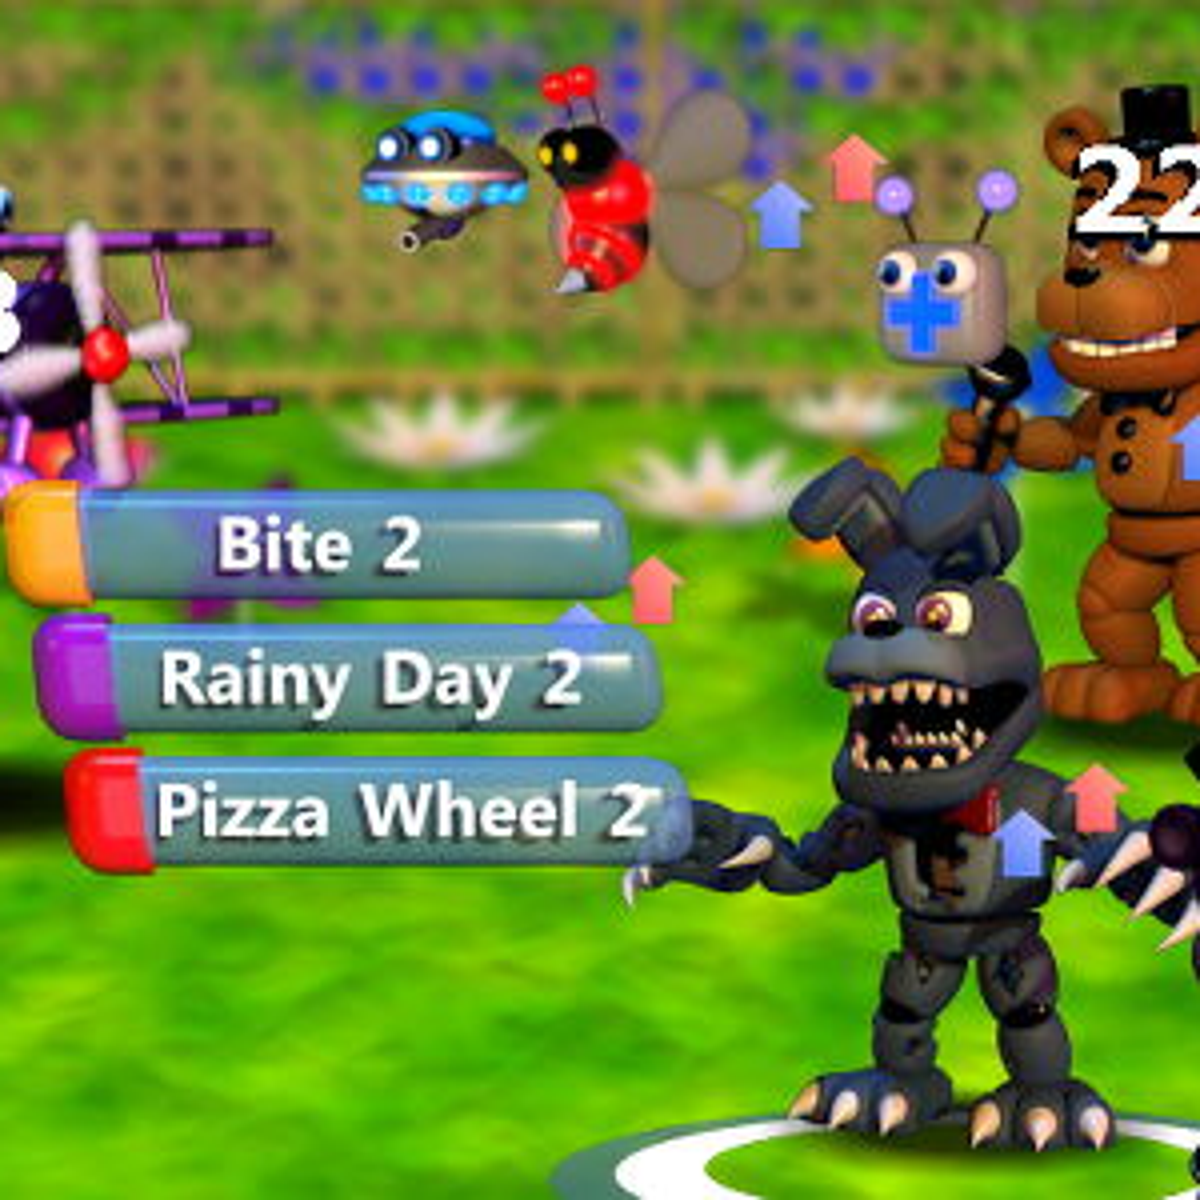 Five Nights at Freddy's World is now a free download